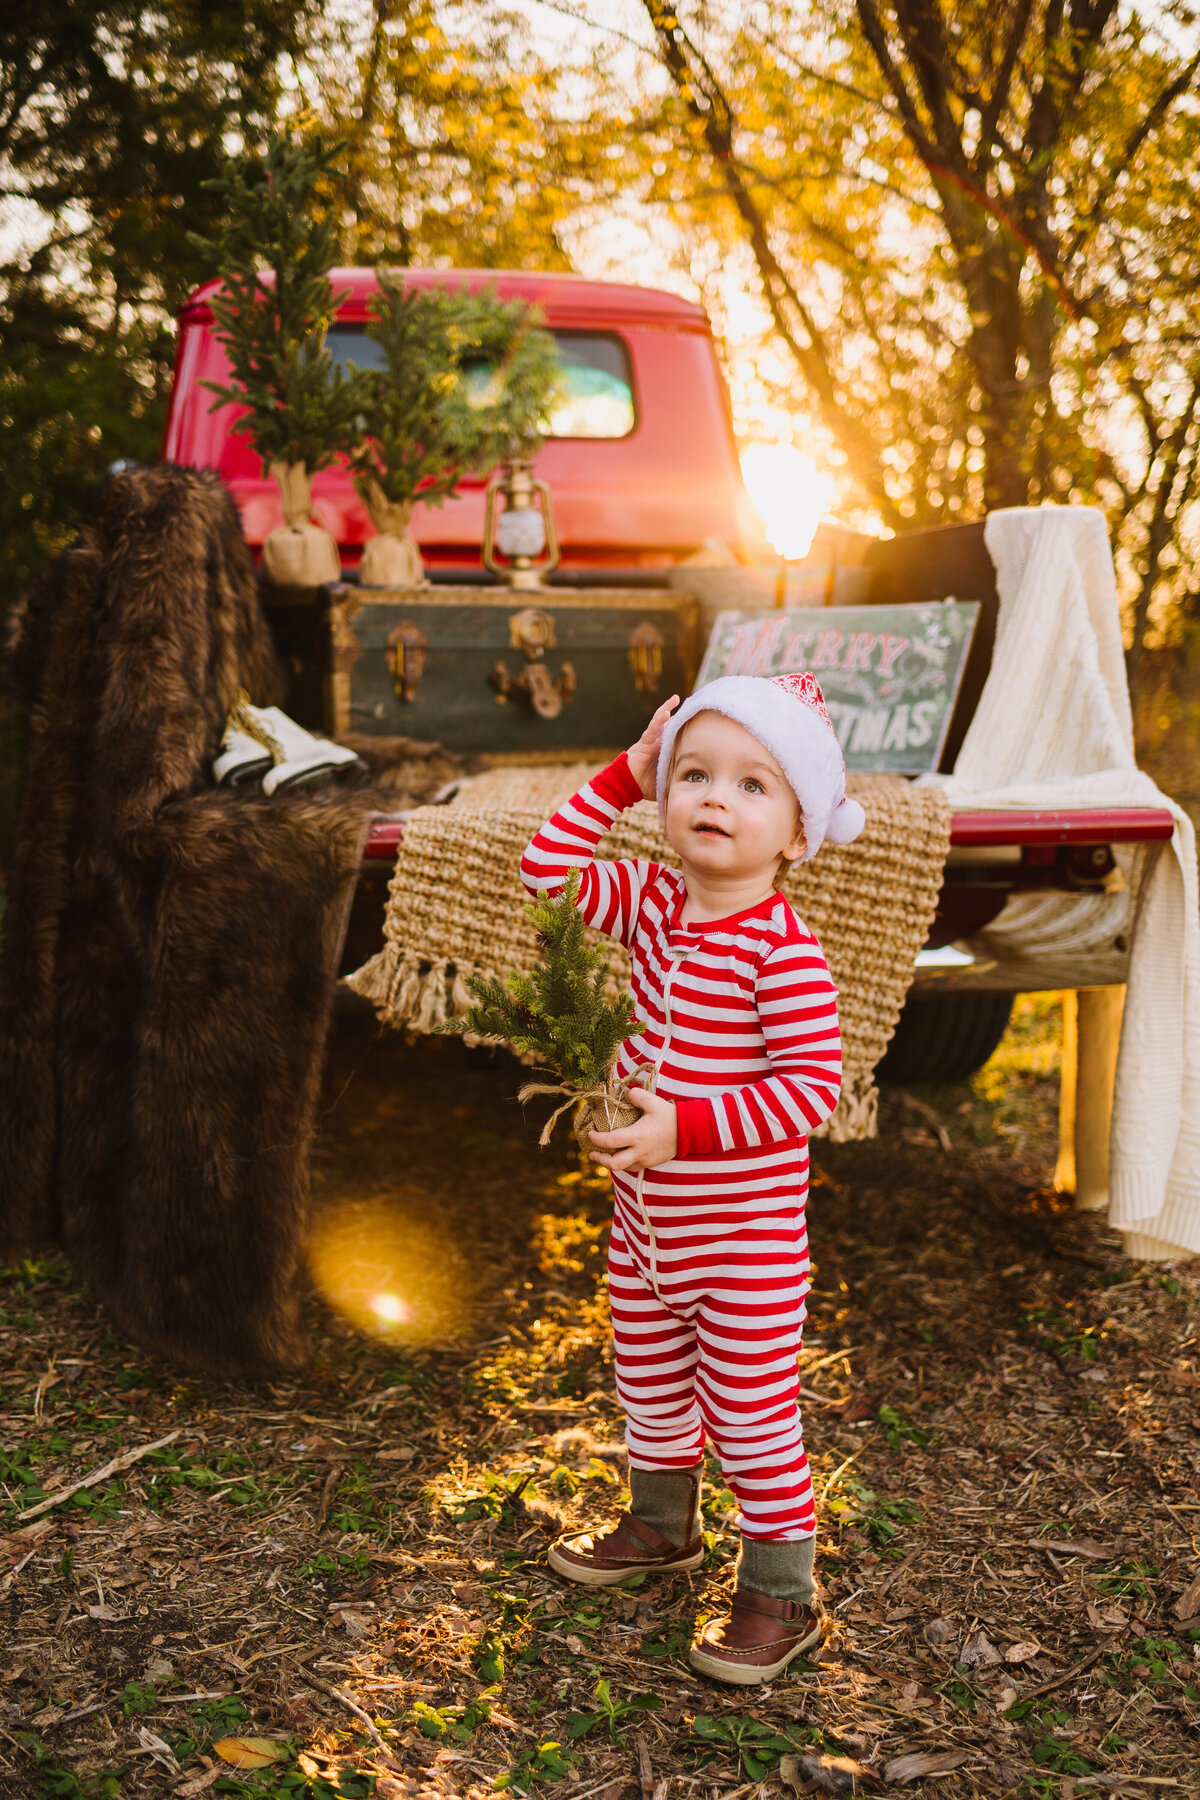 The baby boy is dressed with a red and white pajamas. He is in front of a red truck car and it is decorated with christmas decoration.